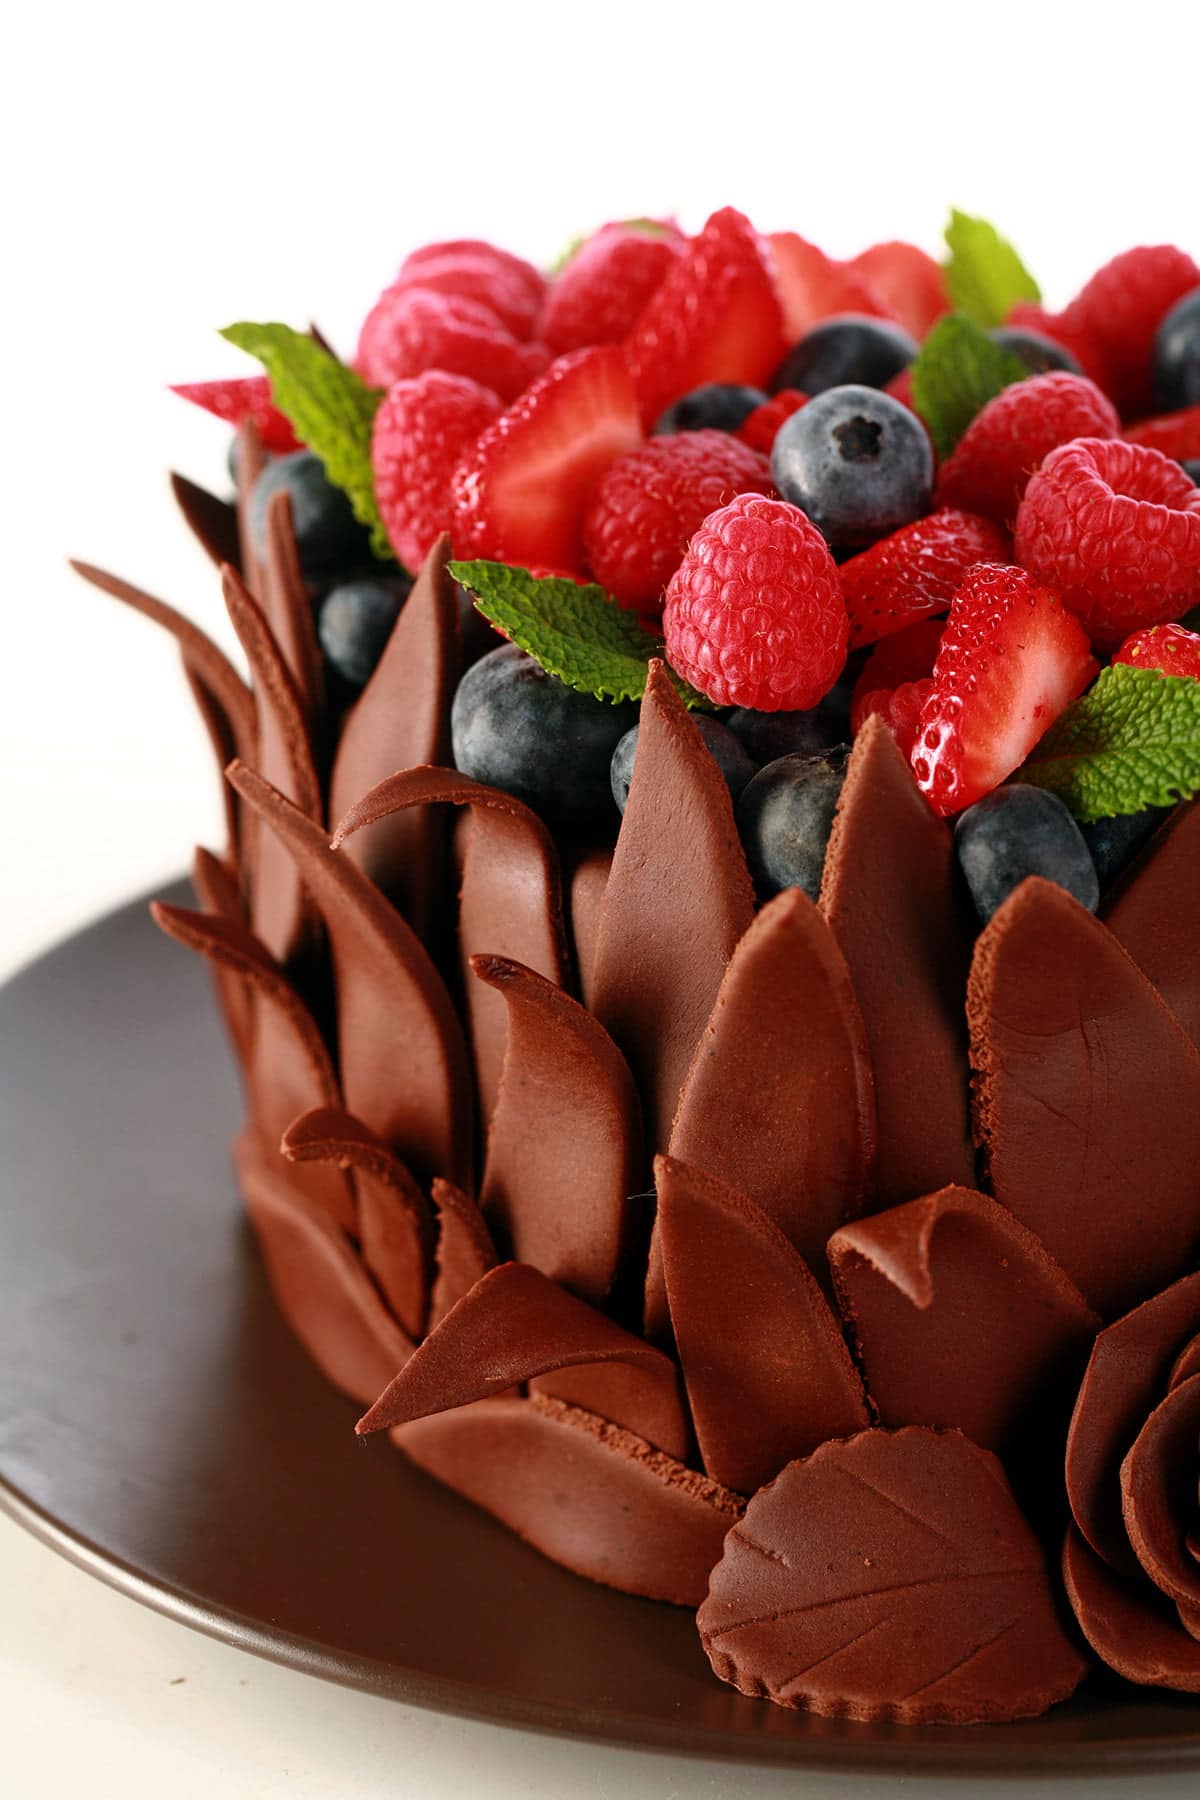 A heart shaped cake, covered in chocolate fondant leaves. The top of the cake is covered with a pile of fresh berries and mint leaves.